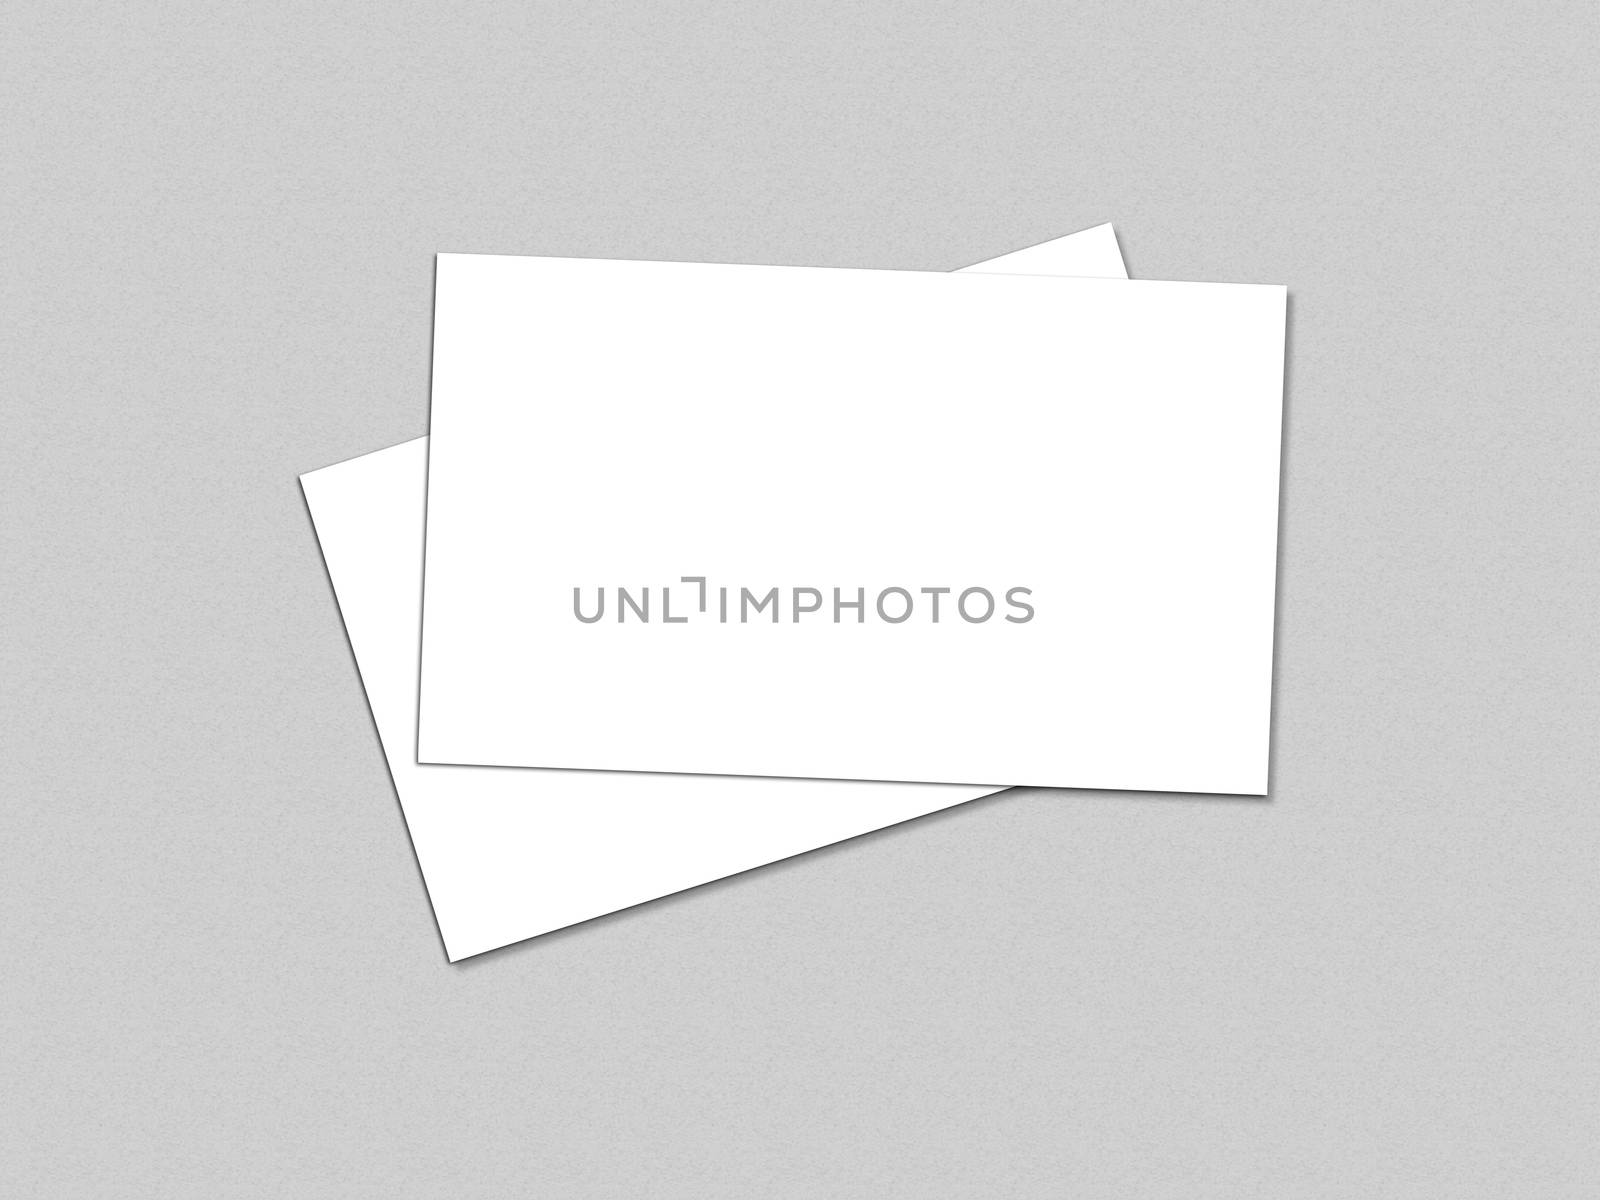 Blank white Business Card template mockup for presentation